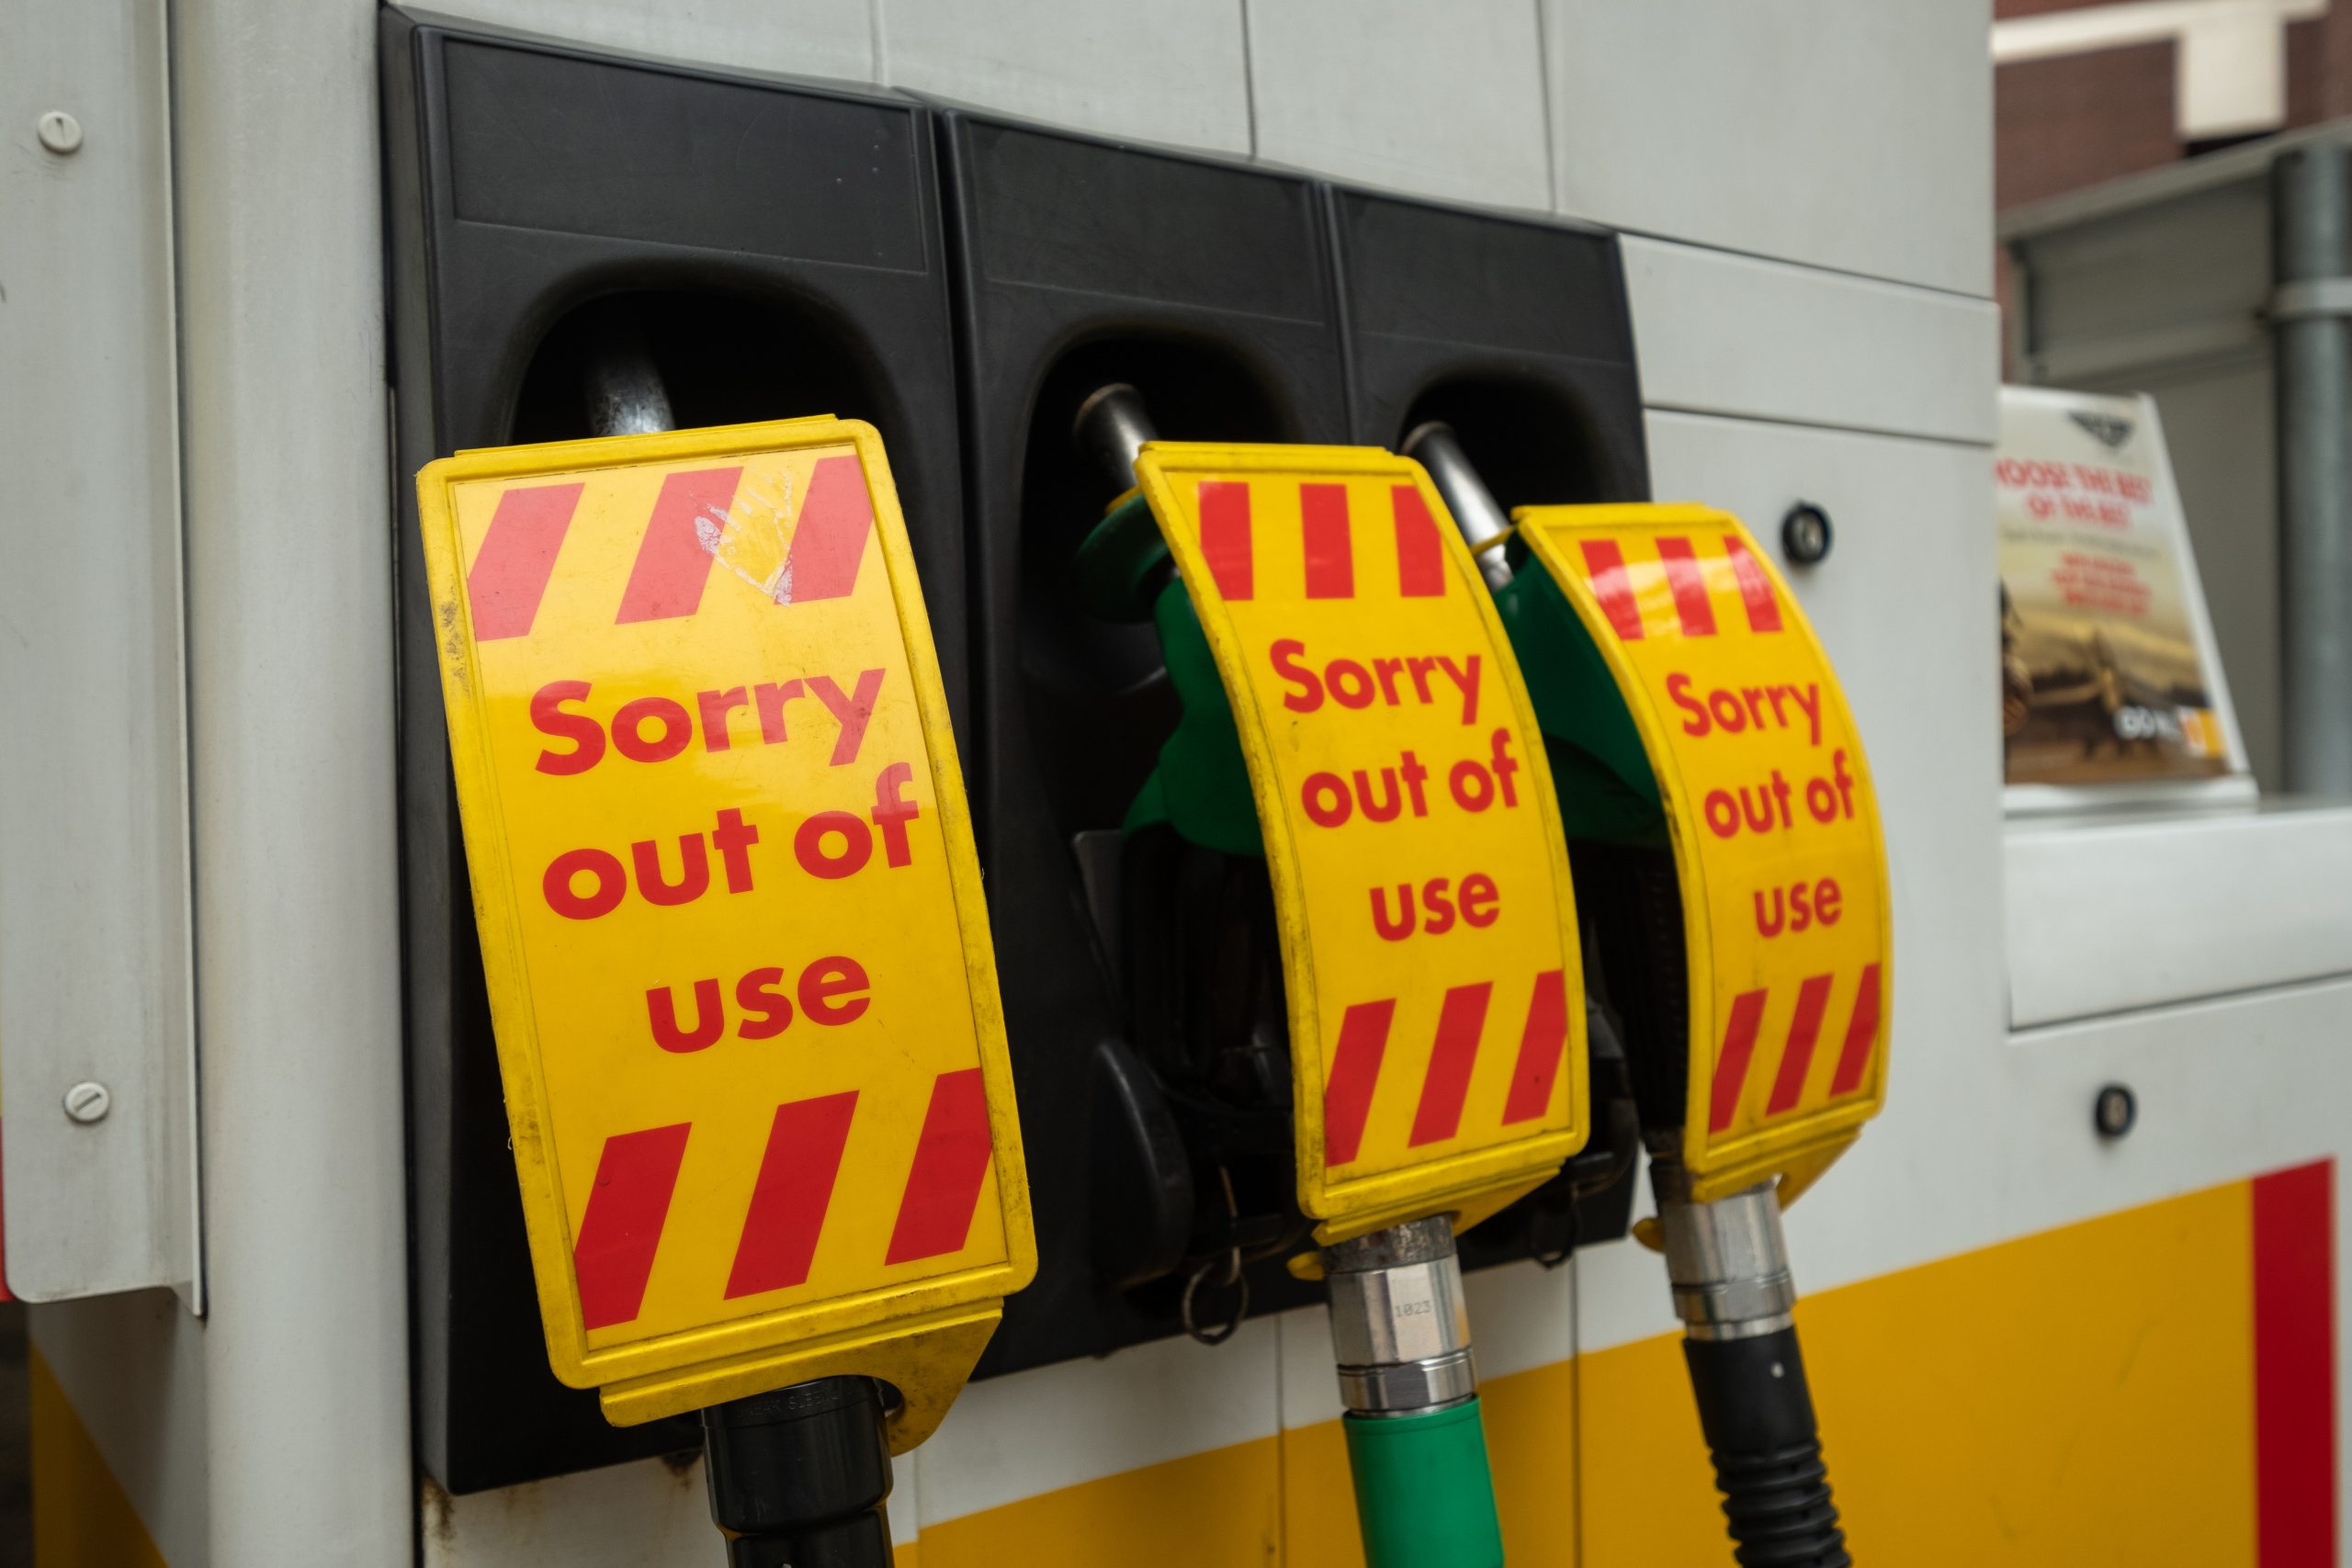 'Sorry out of use' fuel pumps